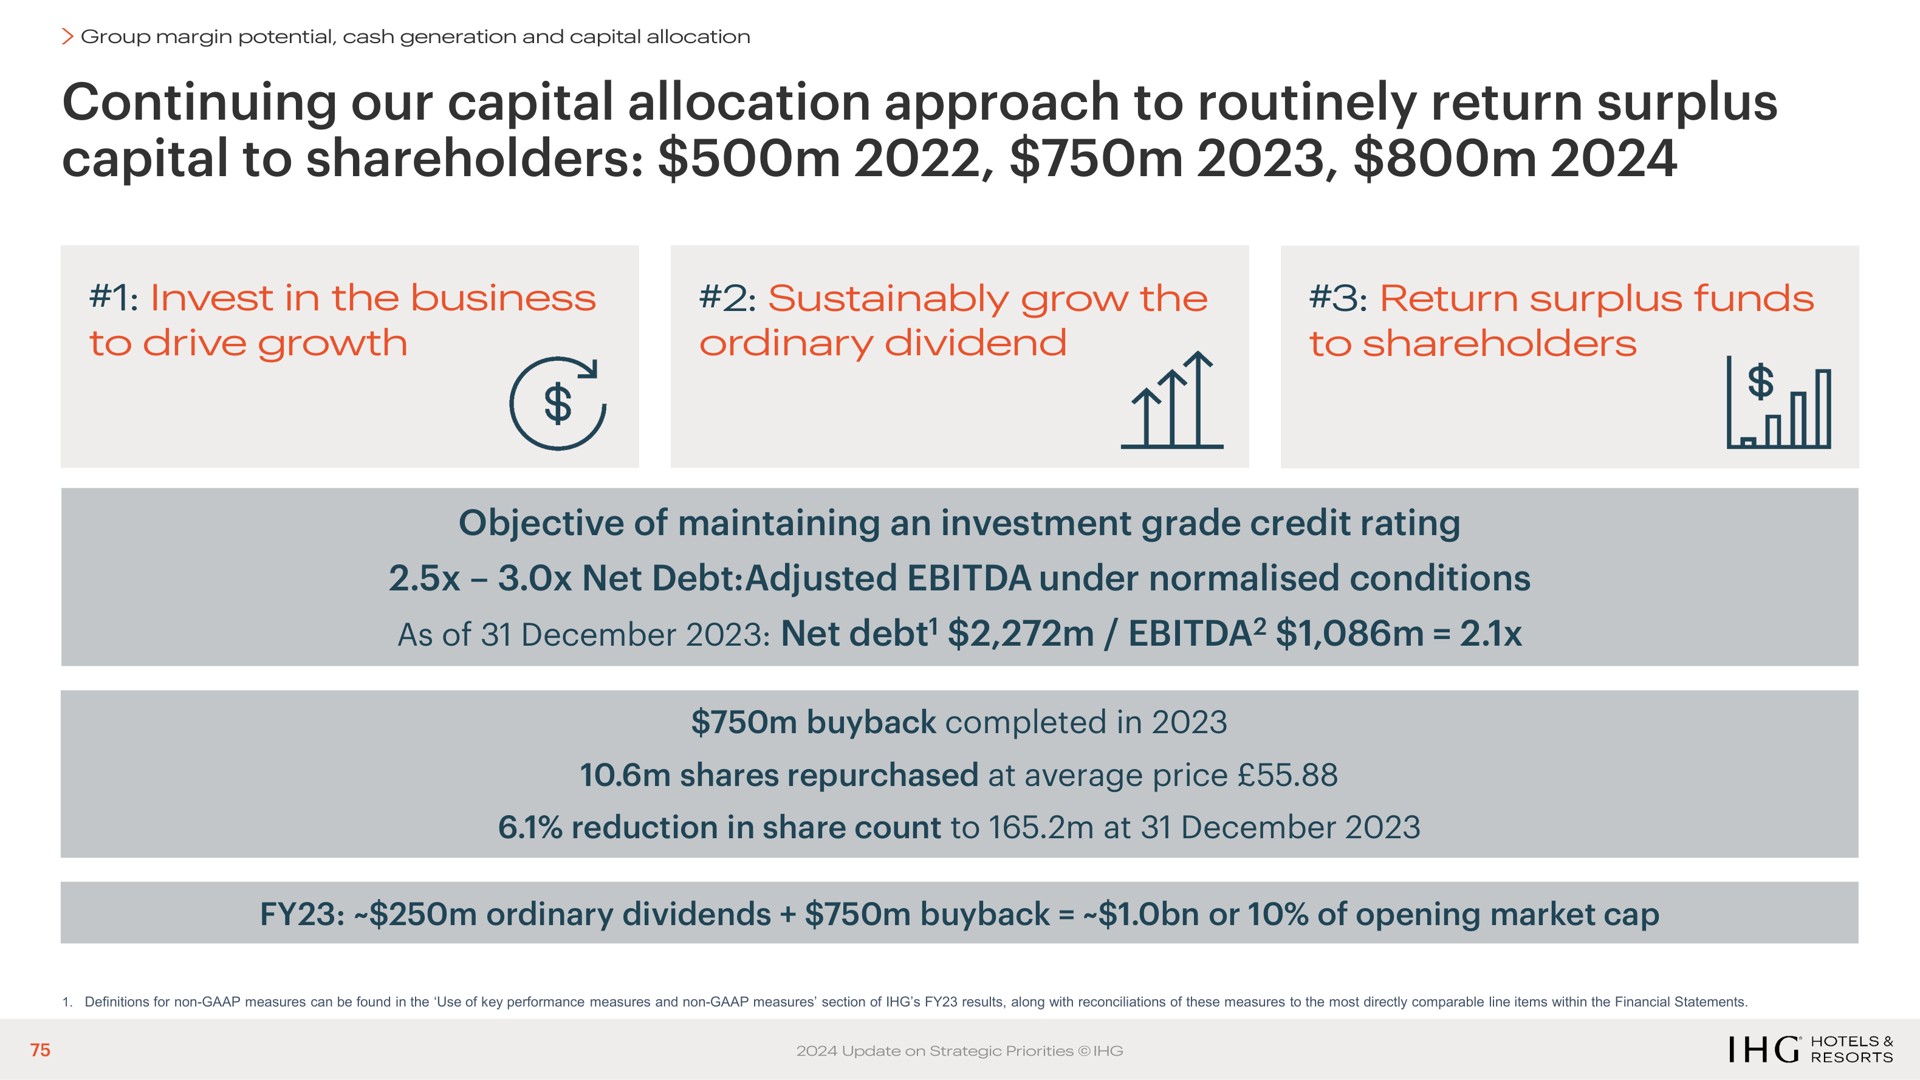 continuing our capital allocation approach to routinely return surplus capital to shareholders | IHG Hotels